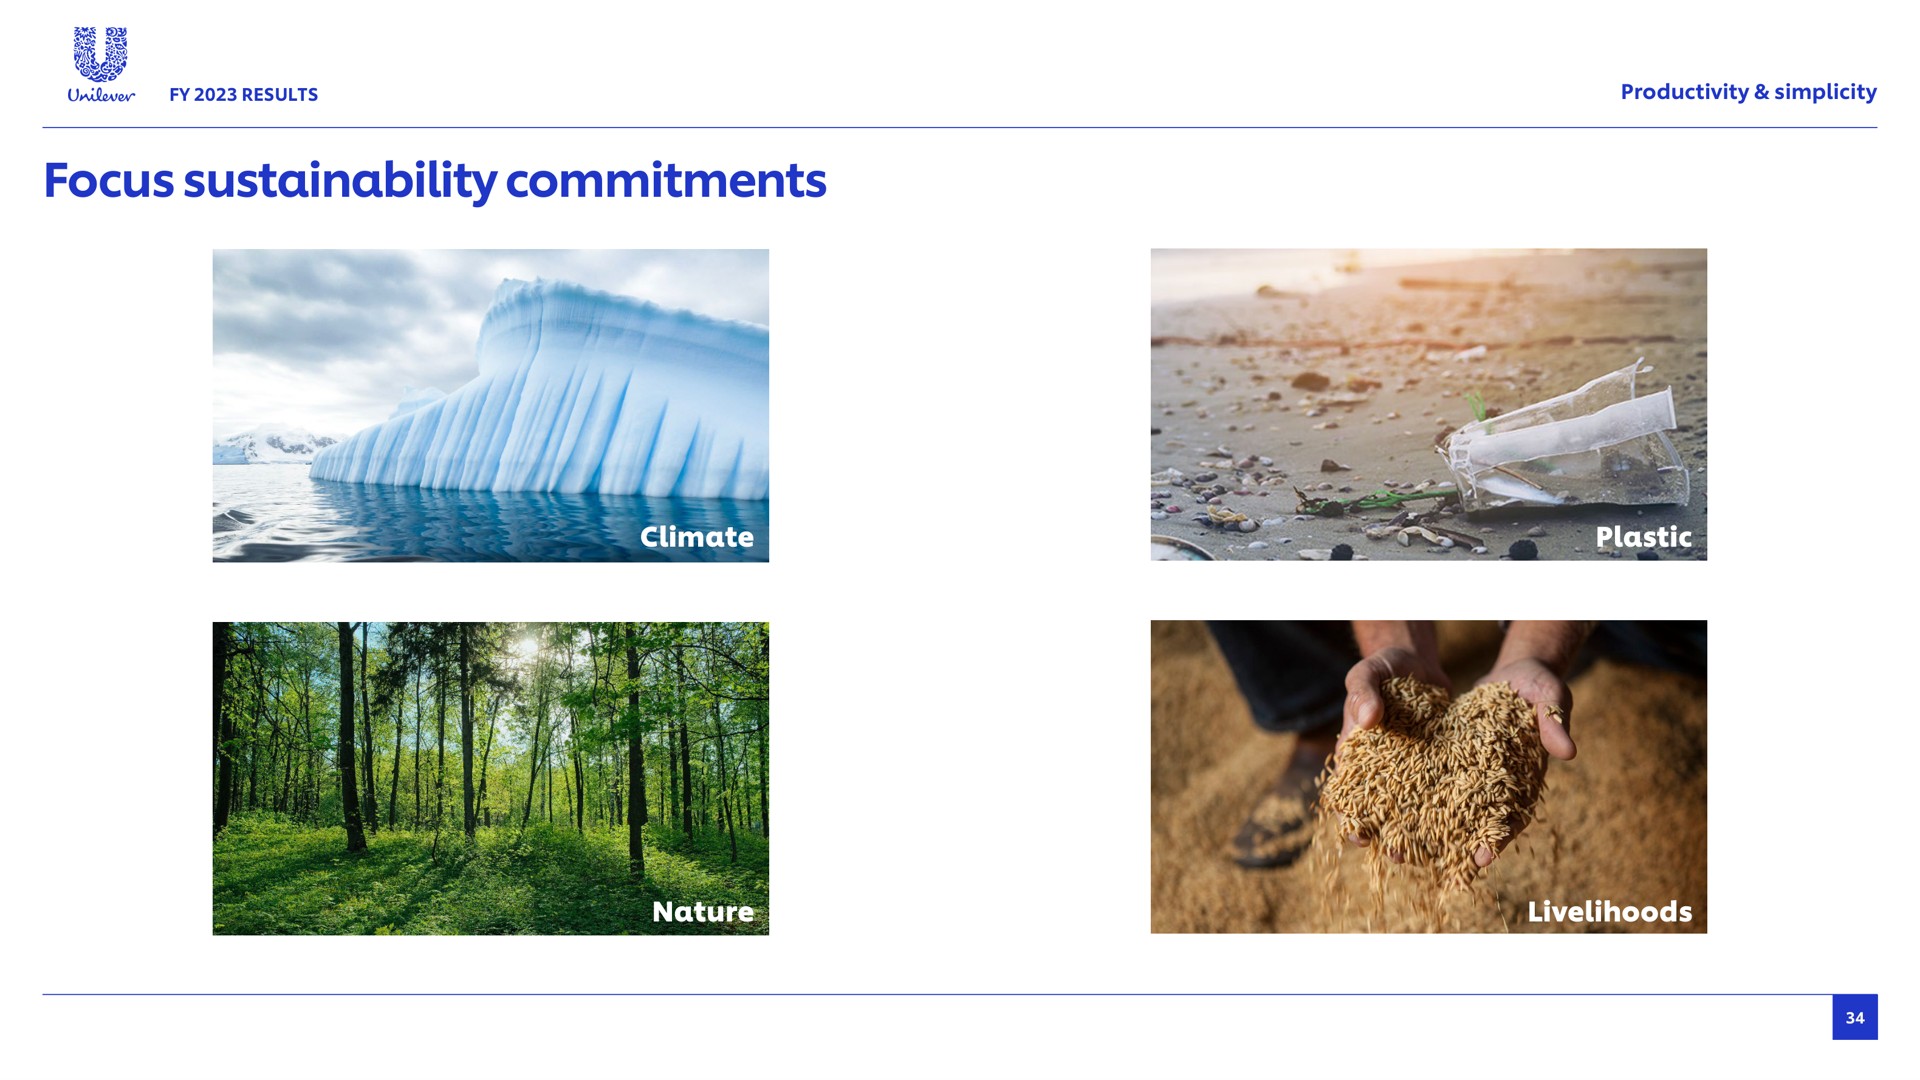 focus commitments as results productivity simplicity plastic nature livelihoods | Unilever